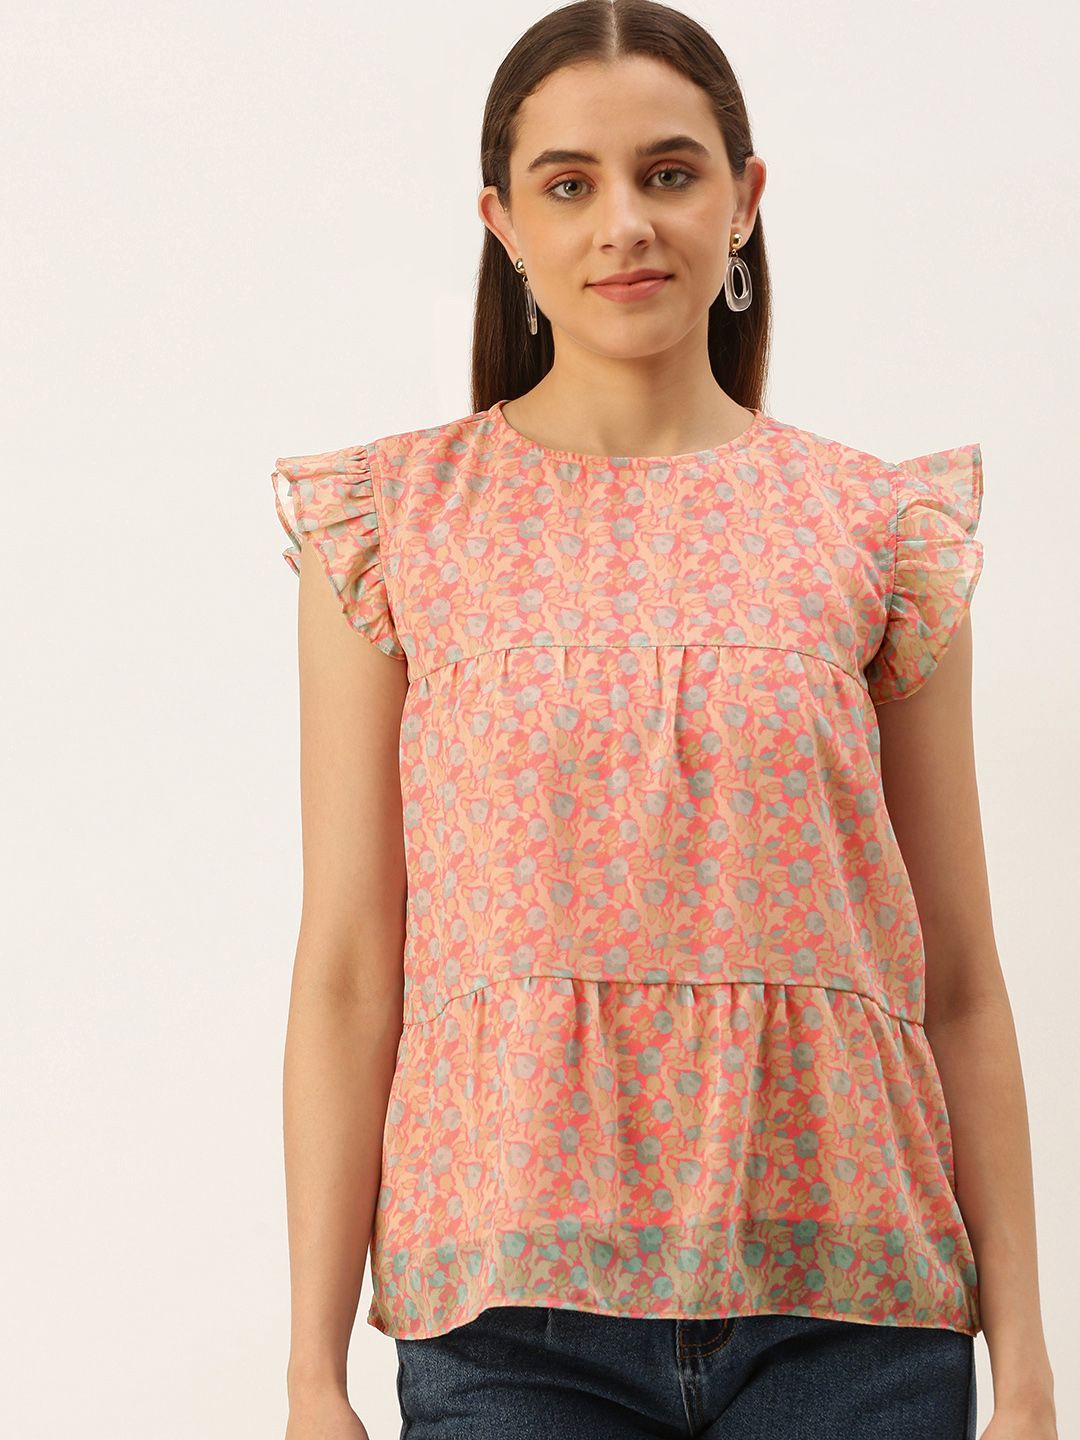 MELOSO Pink & Blue Floral Print Georgette Tiered Top Price in India